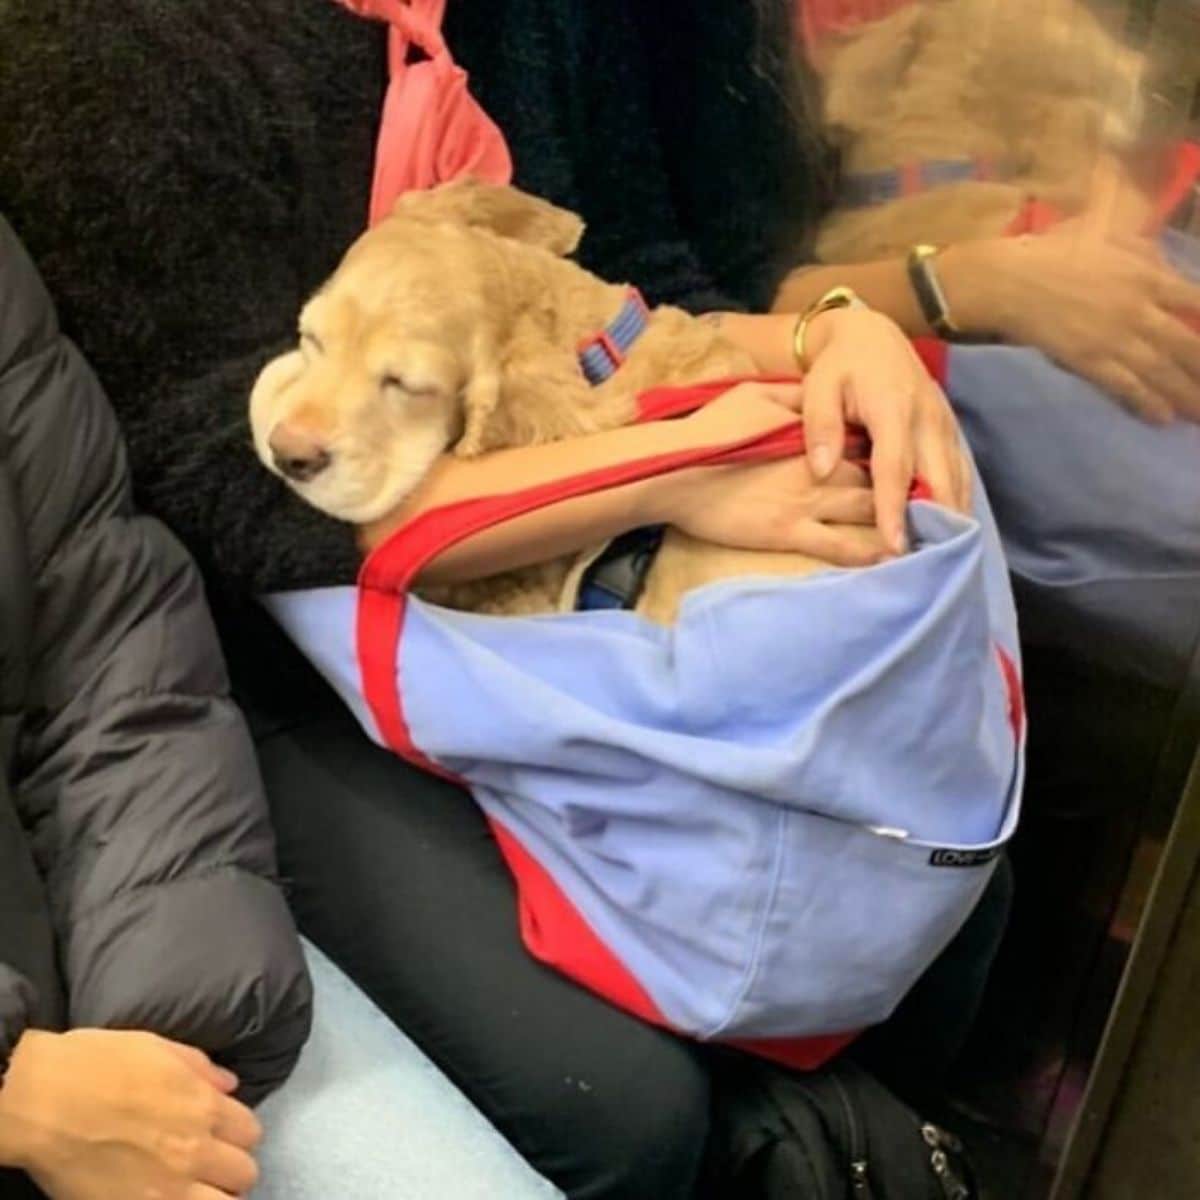 brown dog sleeping in a blue and red cloth bag on someone's lap